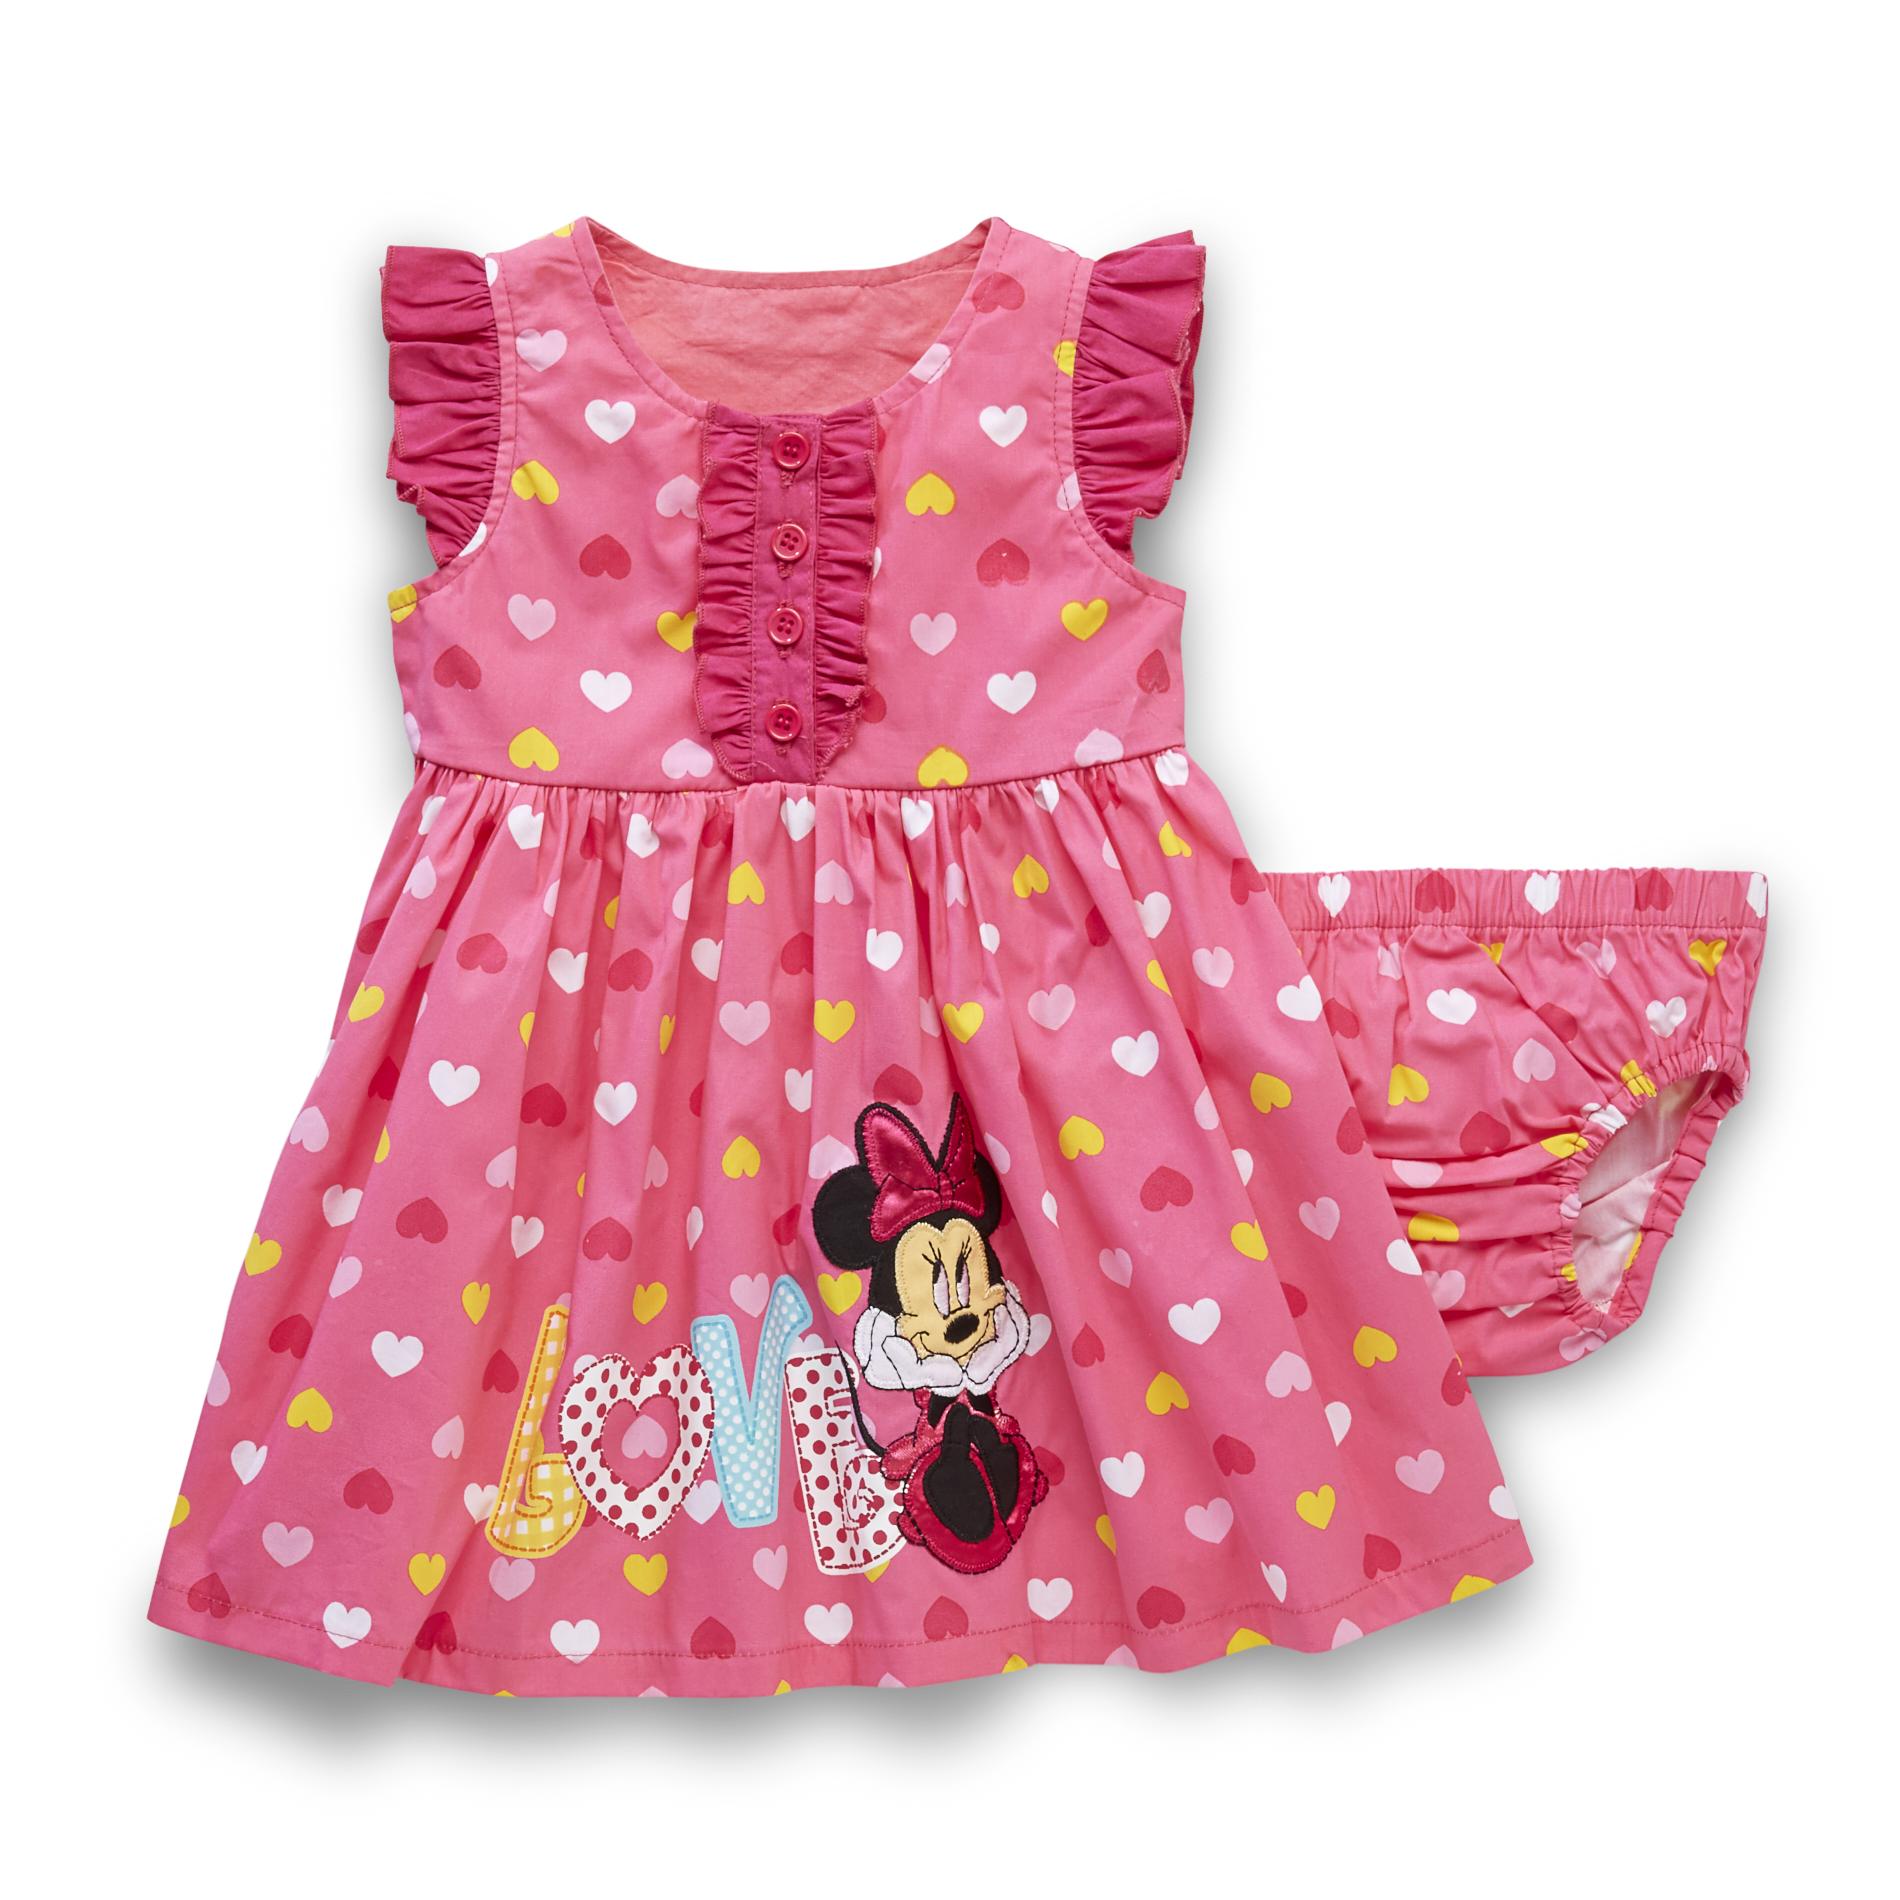 Disney Minnie Mouse Infant Girl's Dress & Diaper Cover - Hearts